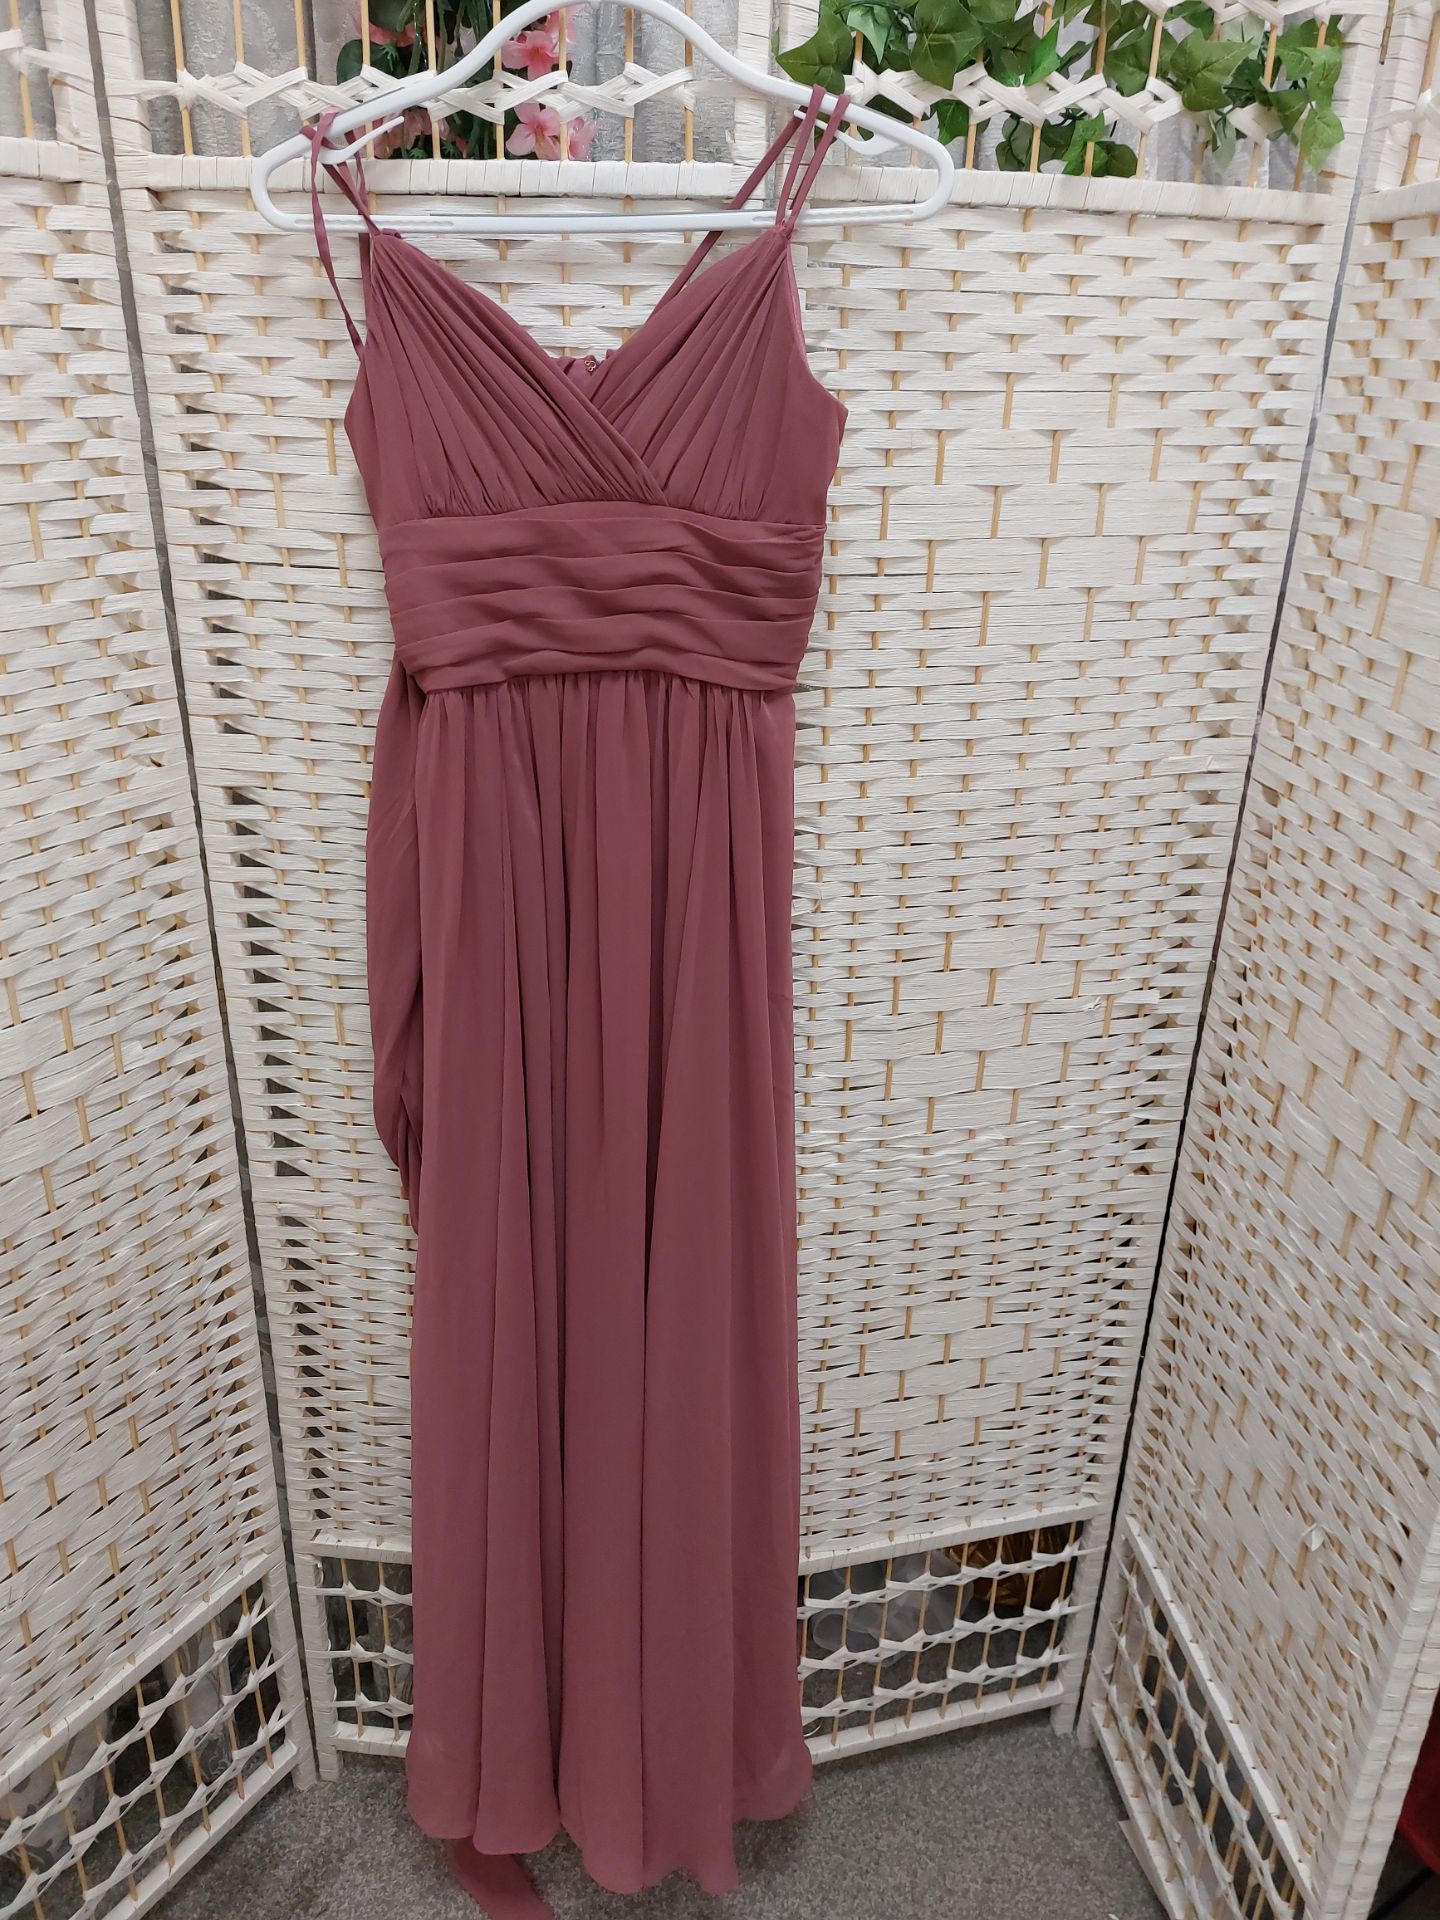 Alexia Prom Dress Child Approx. 10-12 Deep Rose - Image 2 of 2